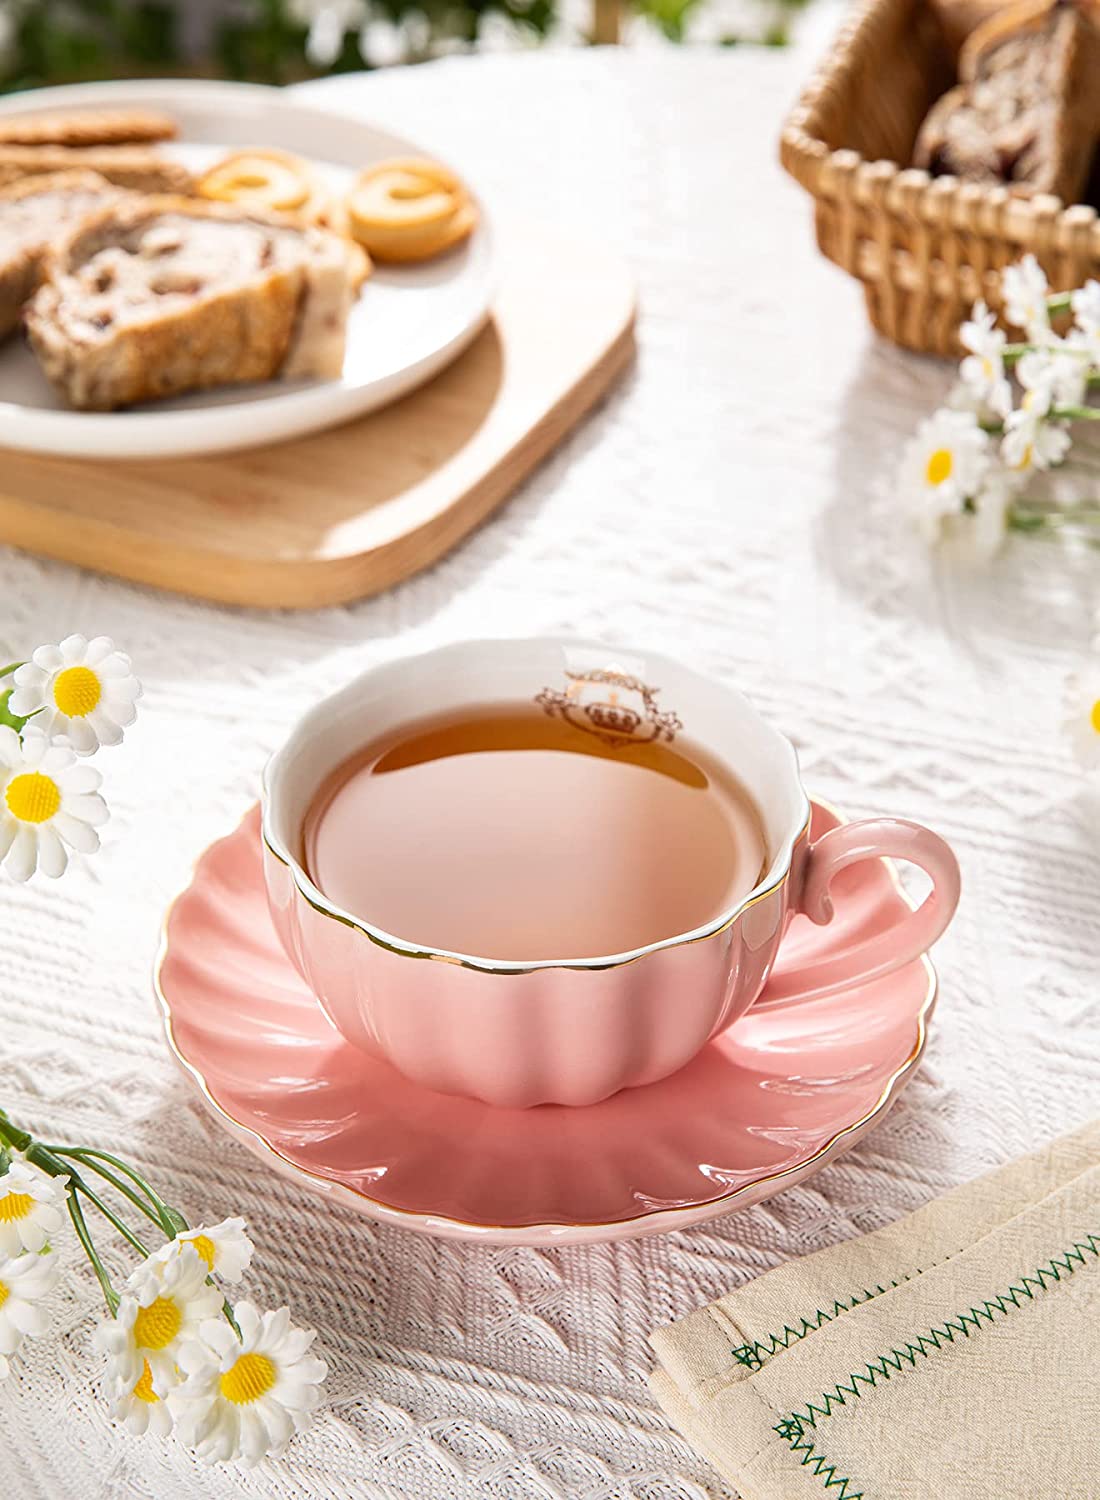 Unique Tea Cups and Saucers in Gift Box as Birthday Gift, Elegant